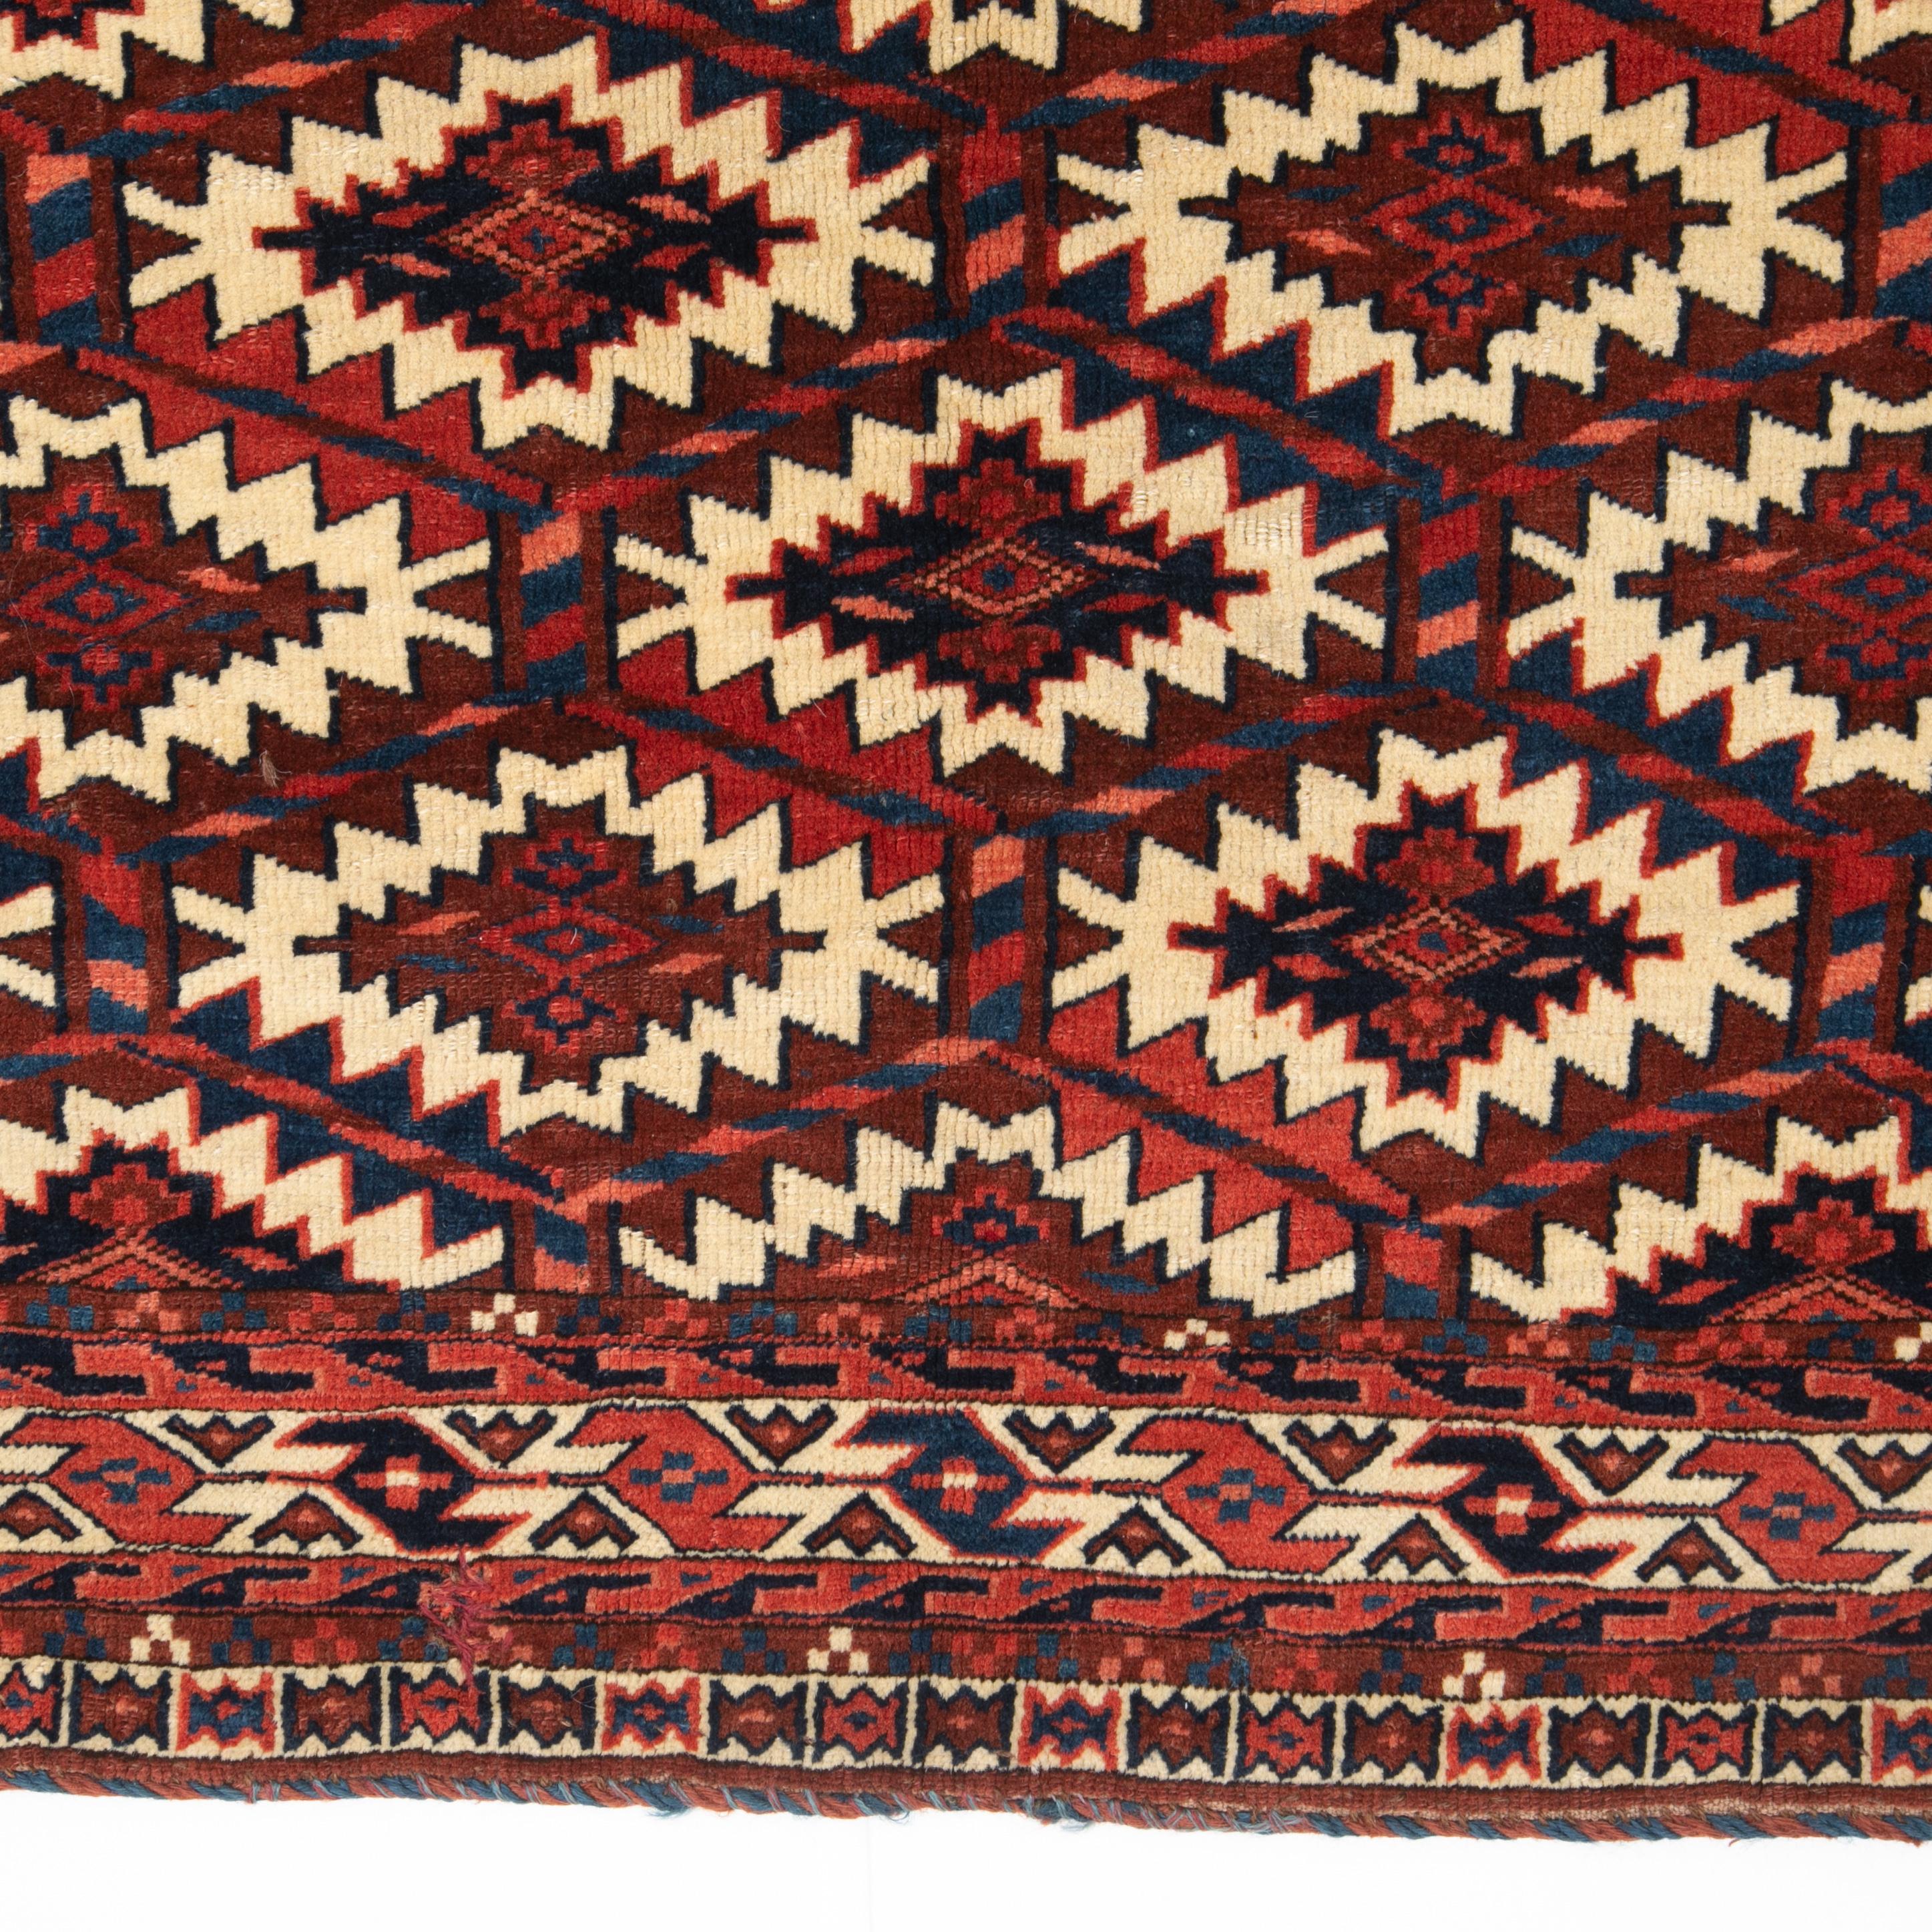 Hand-Woven Antique Turkmen Yomud Tribe Camel Trapping or Asmalyk, Last Quarter 19th C For Sale